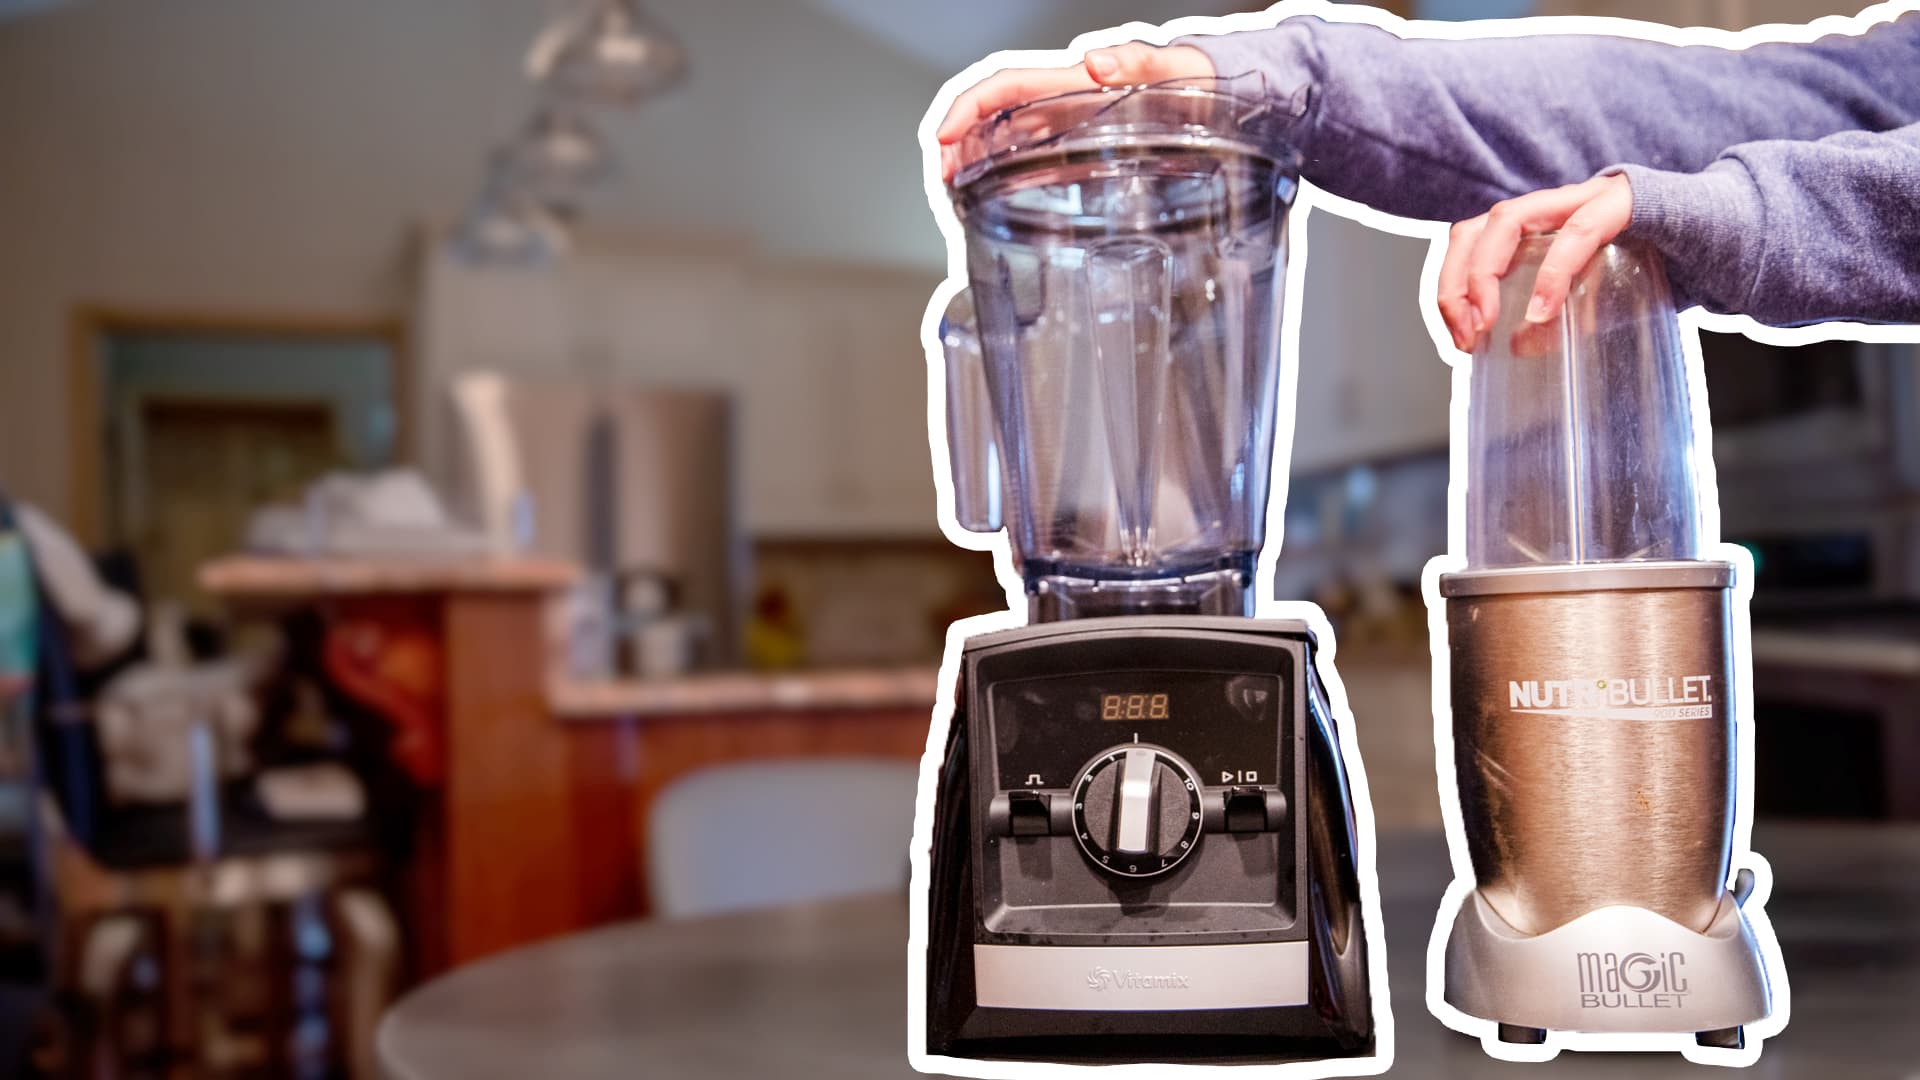 Nutribullet vs Magic Bullet: What's The Difference?